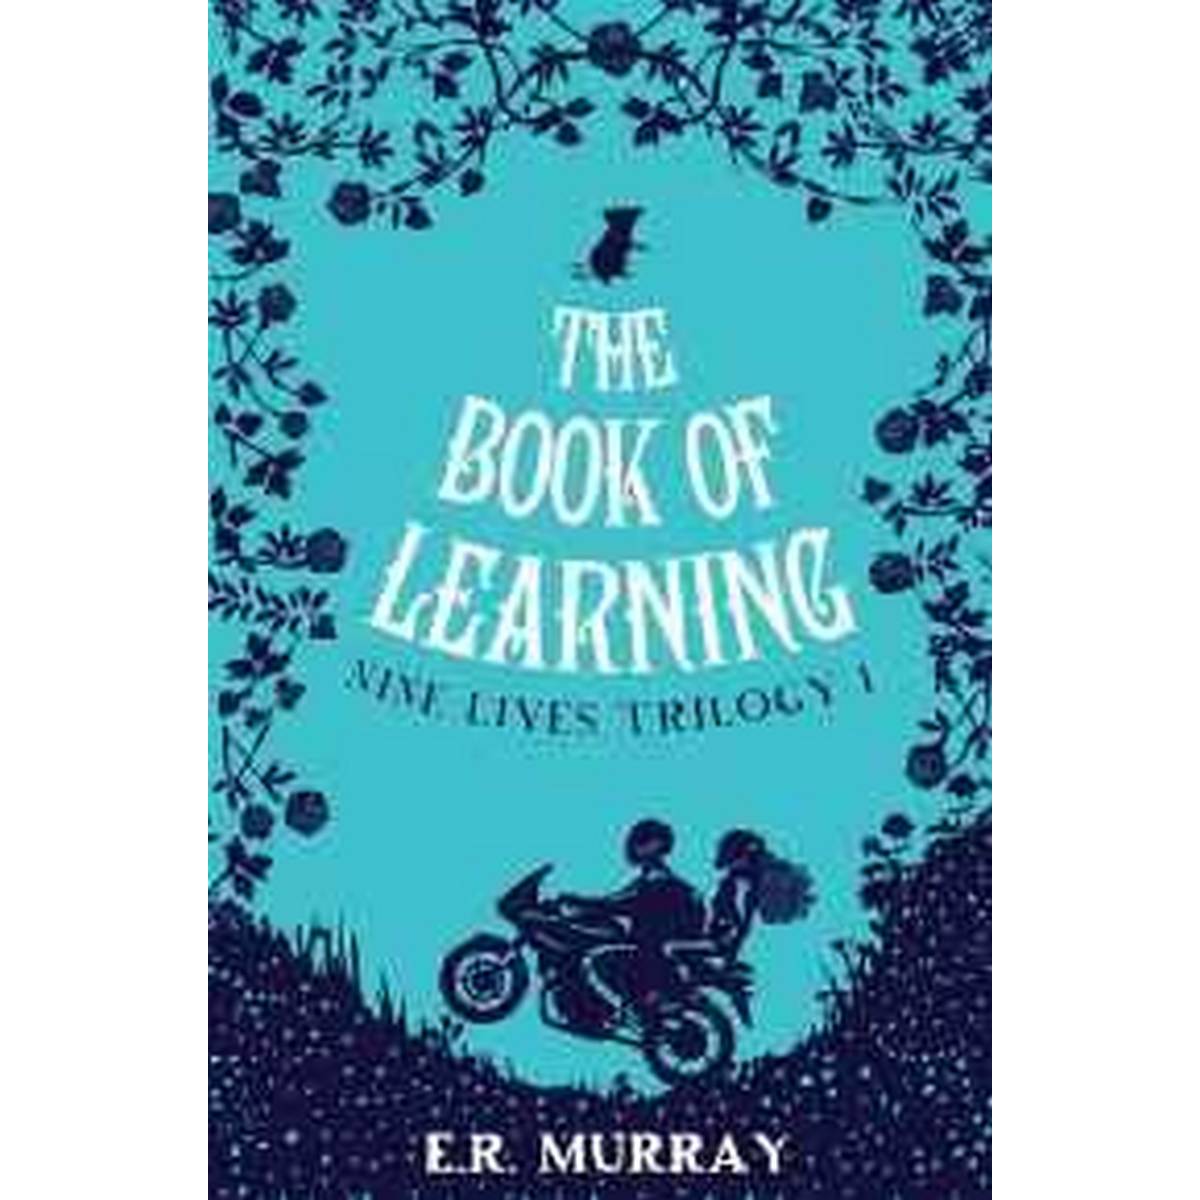 The Book of Learning (Nine Lives Trilogy: 1)